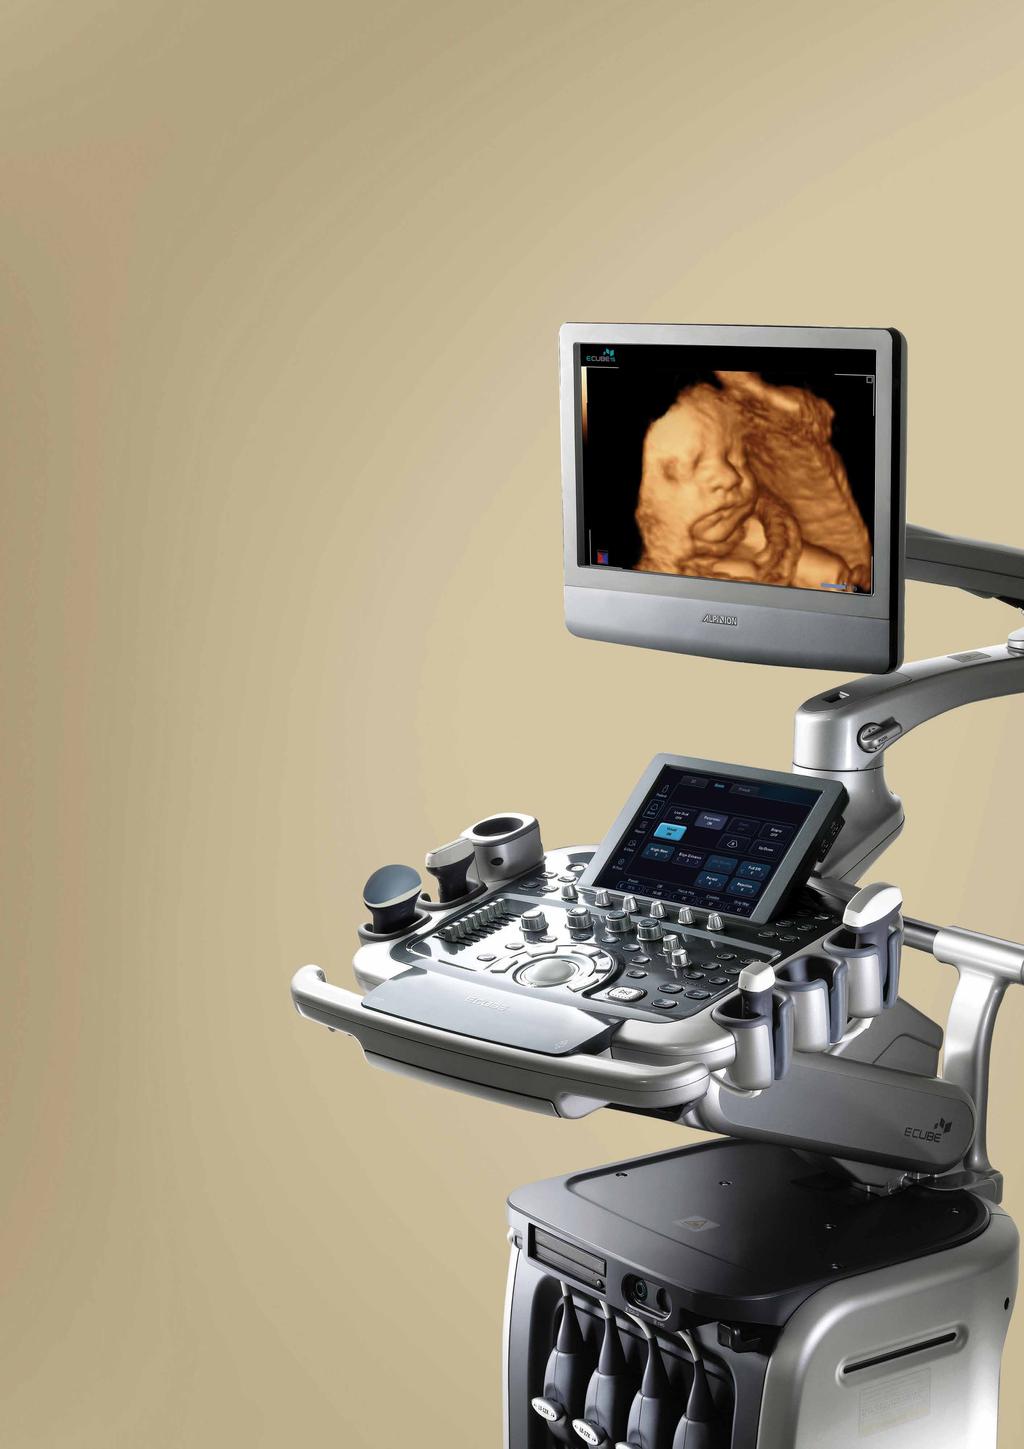 E-CUBE 15 EX Value Creation EX Enhanced experience Optimal Imaging Suite Image Quality Enhancements Optimal Imaging Suite, ALPINION s integrated image post processing software set, provides better